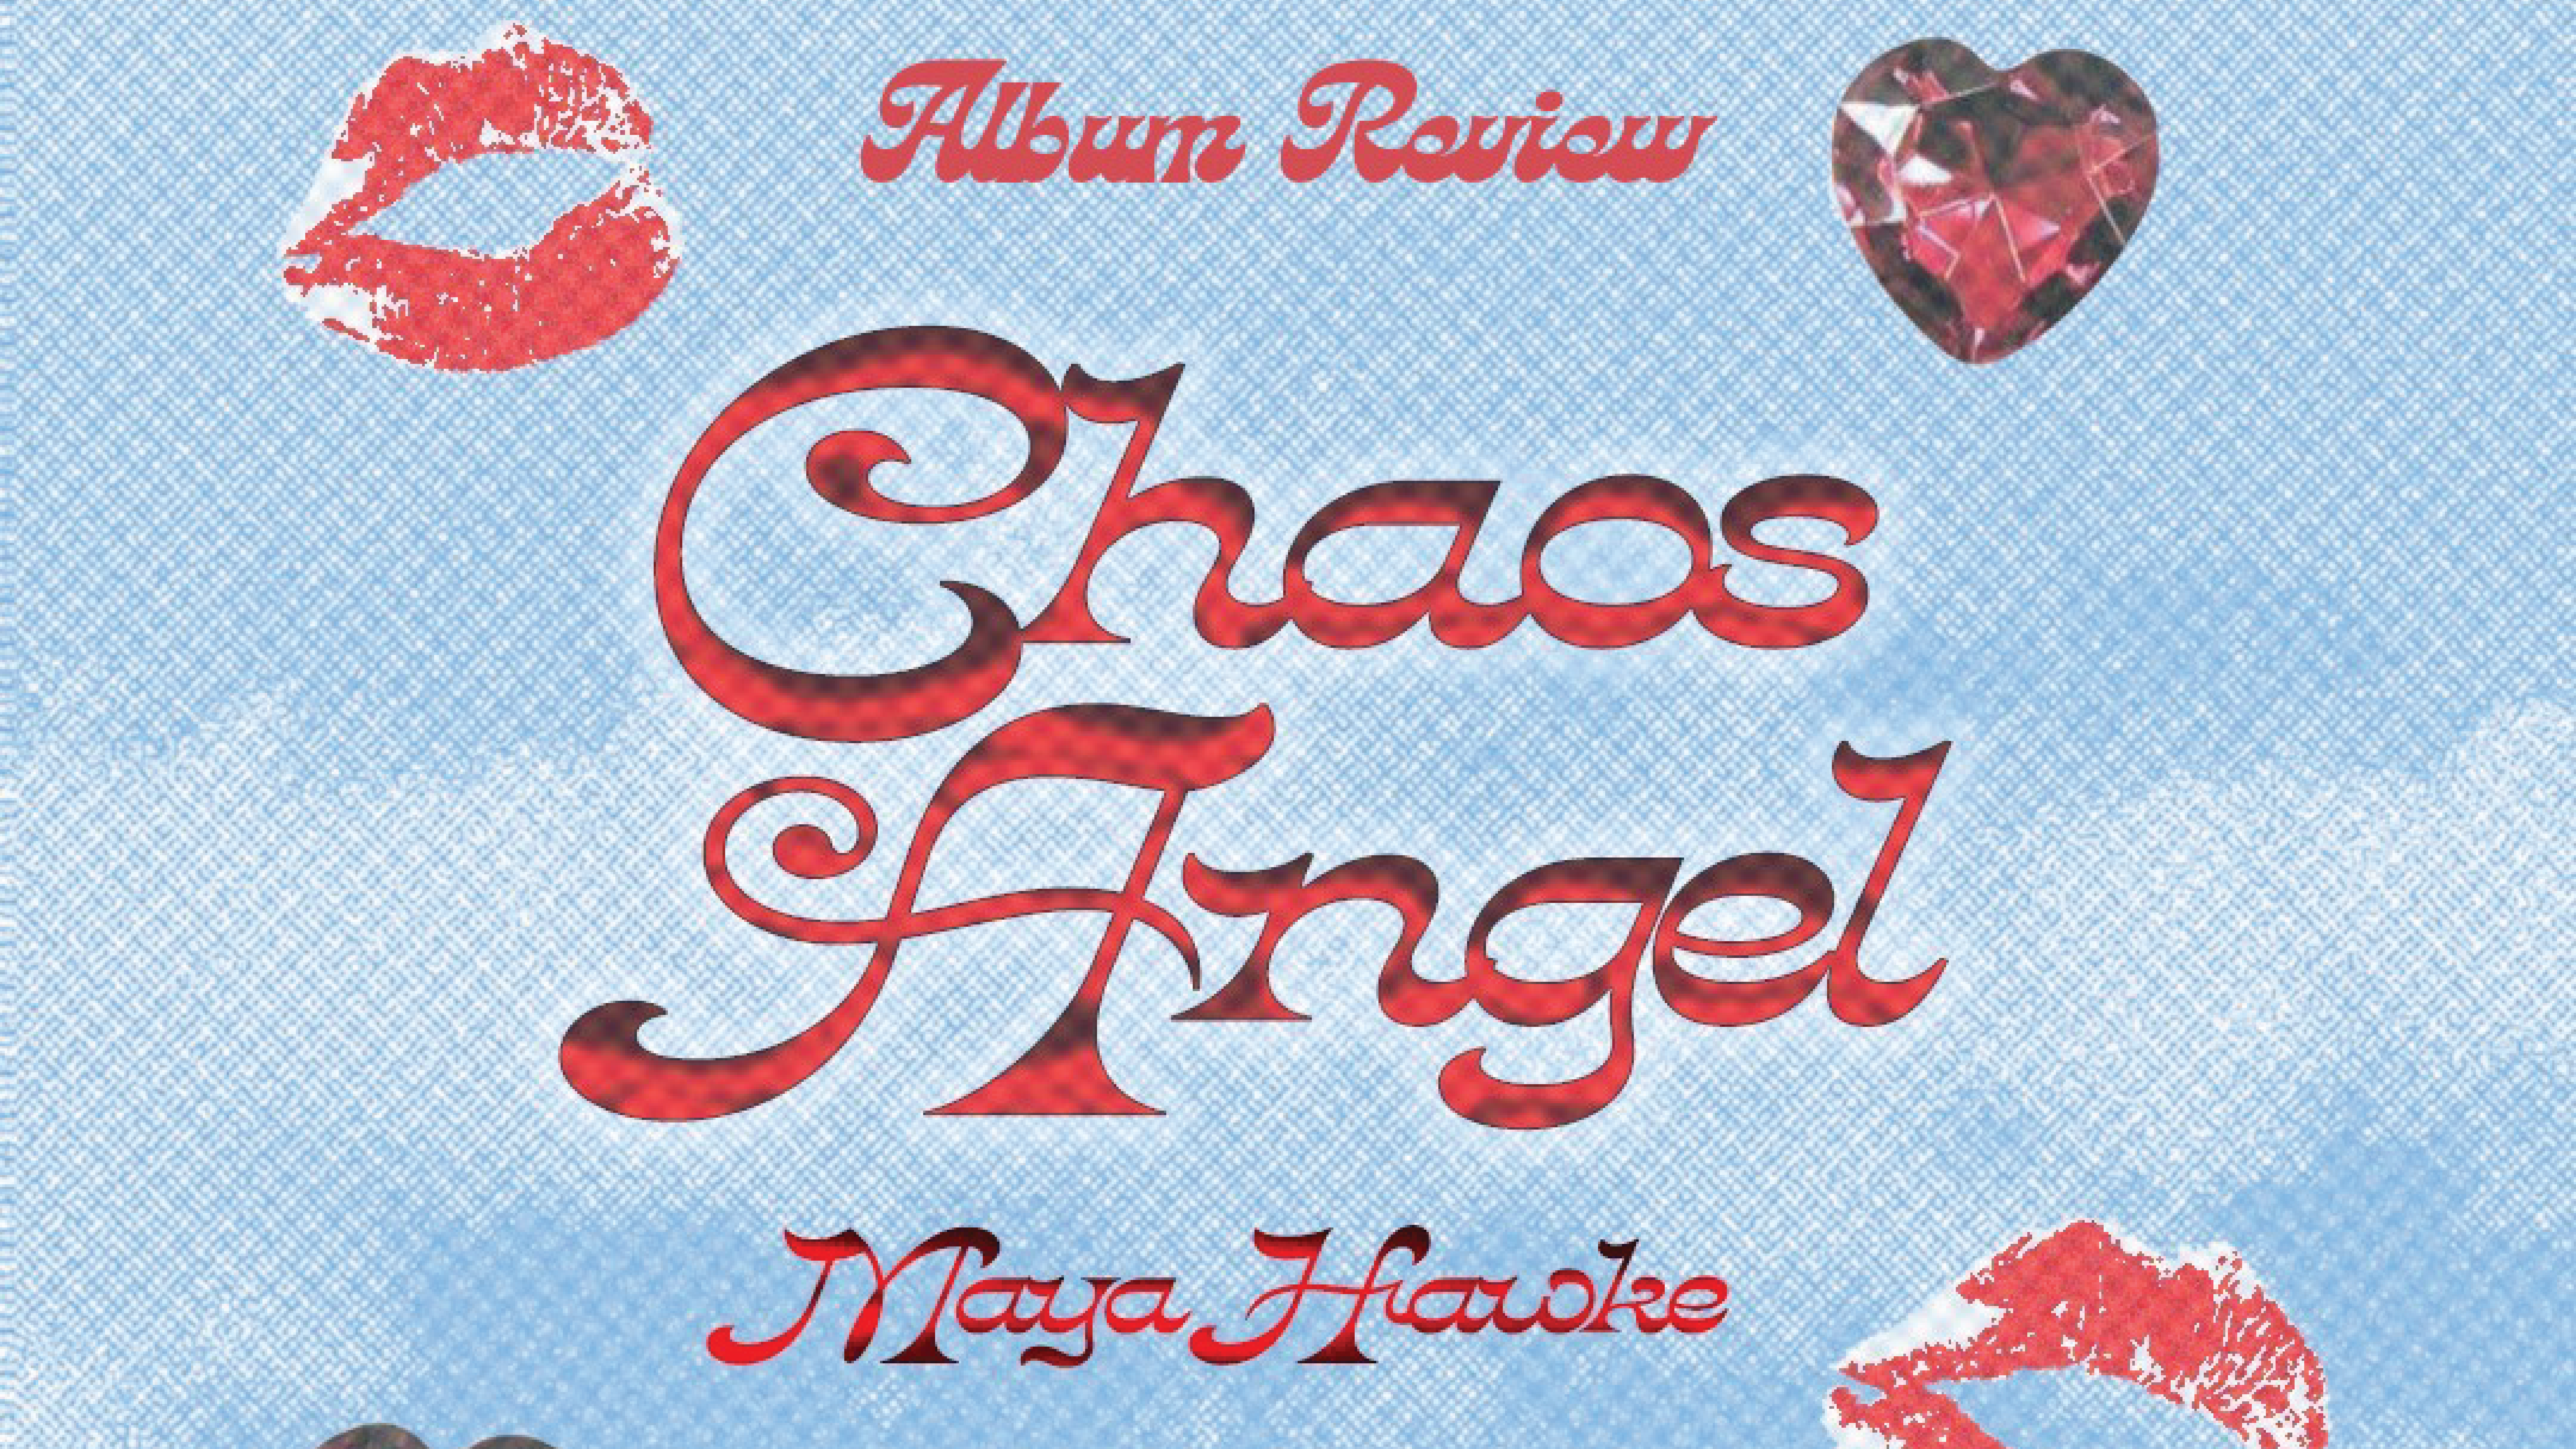 A pale blue sky with soft clouds and red text that reads: "Album review - Chaos Angel - Maya Hawke" with red lipstick kiss marks in the top left and bottom right corner.